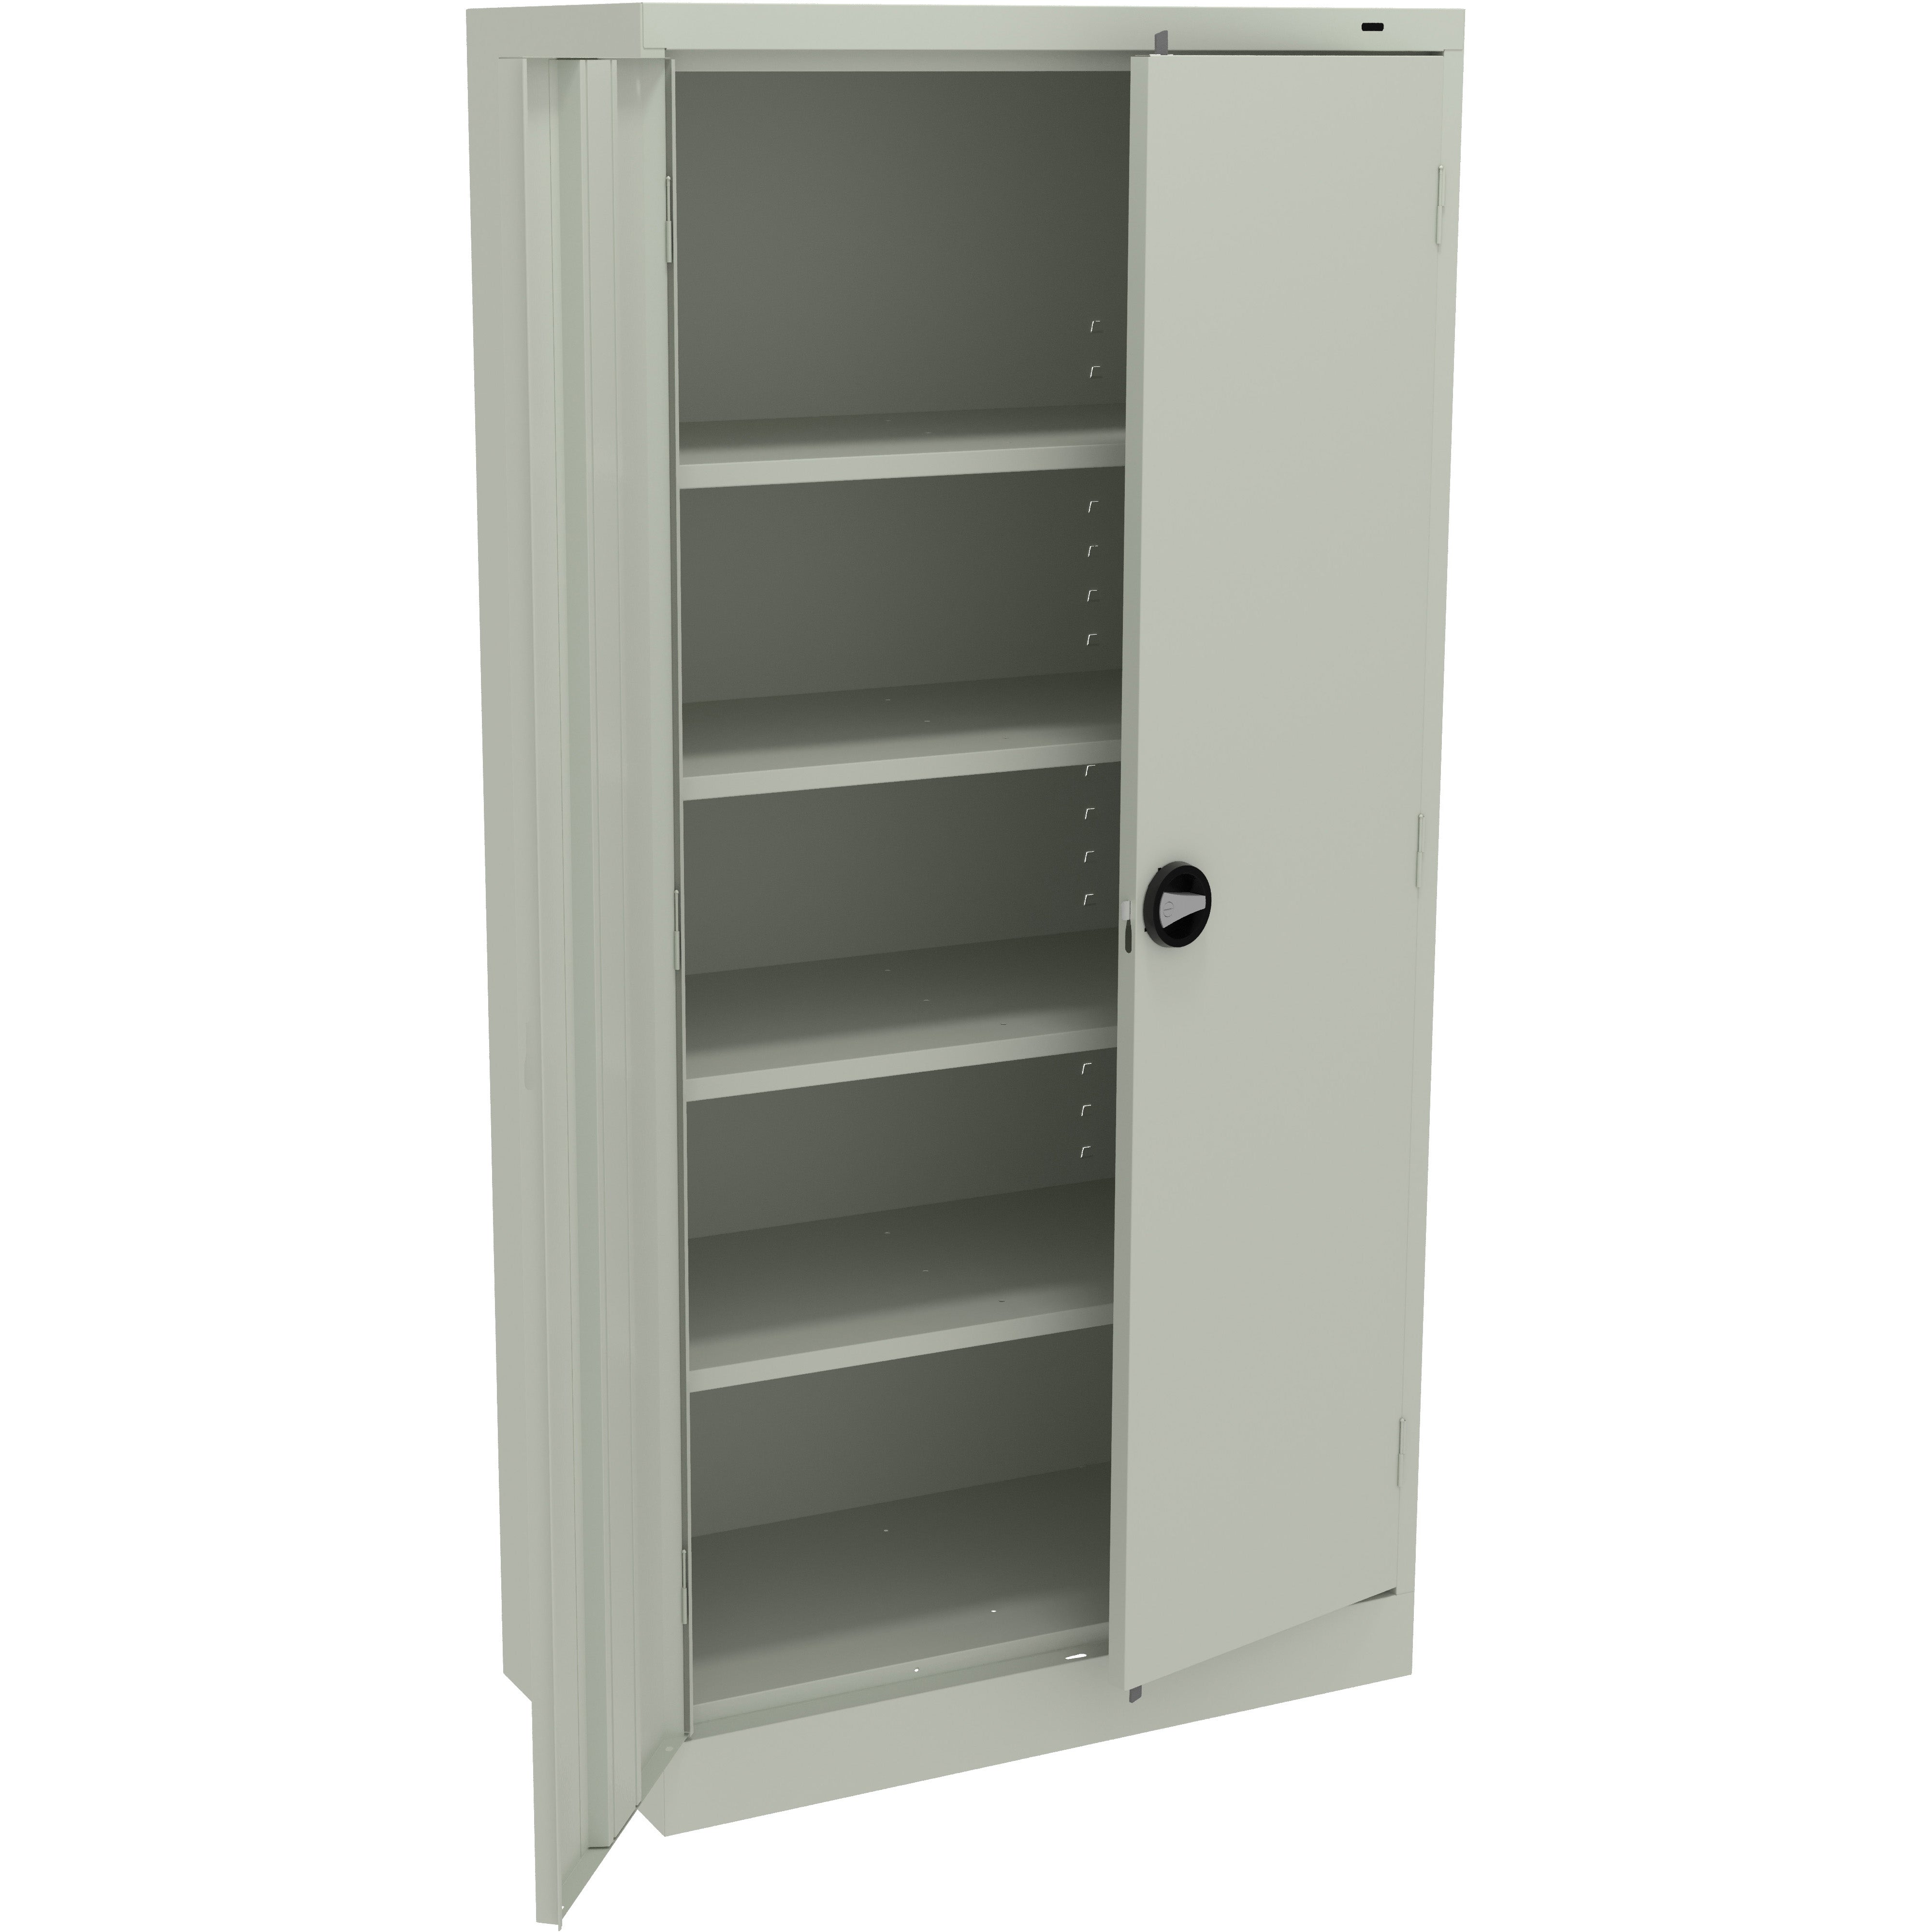 Tennsco 72" High Standard Traditional Recessed Handle Cabinet - Assembled, 7218RH